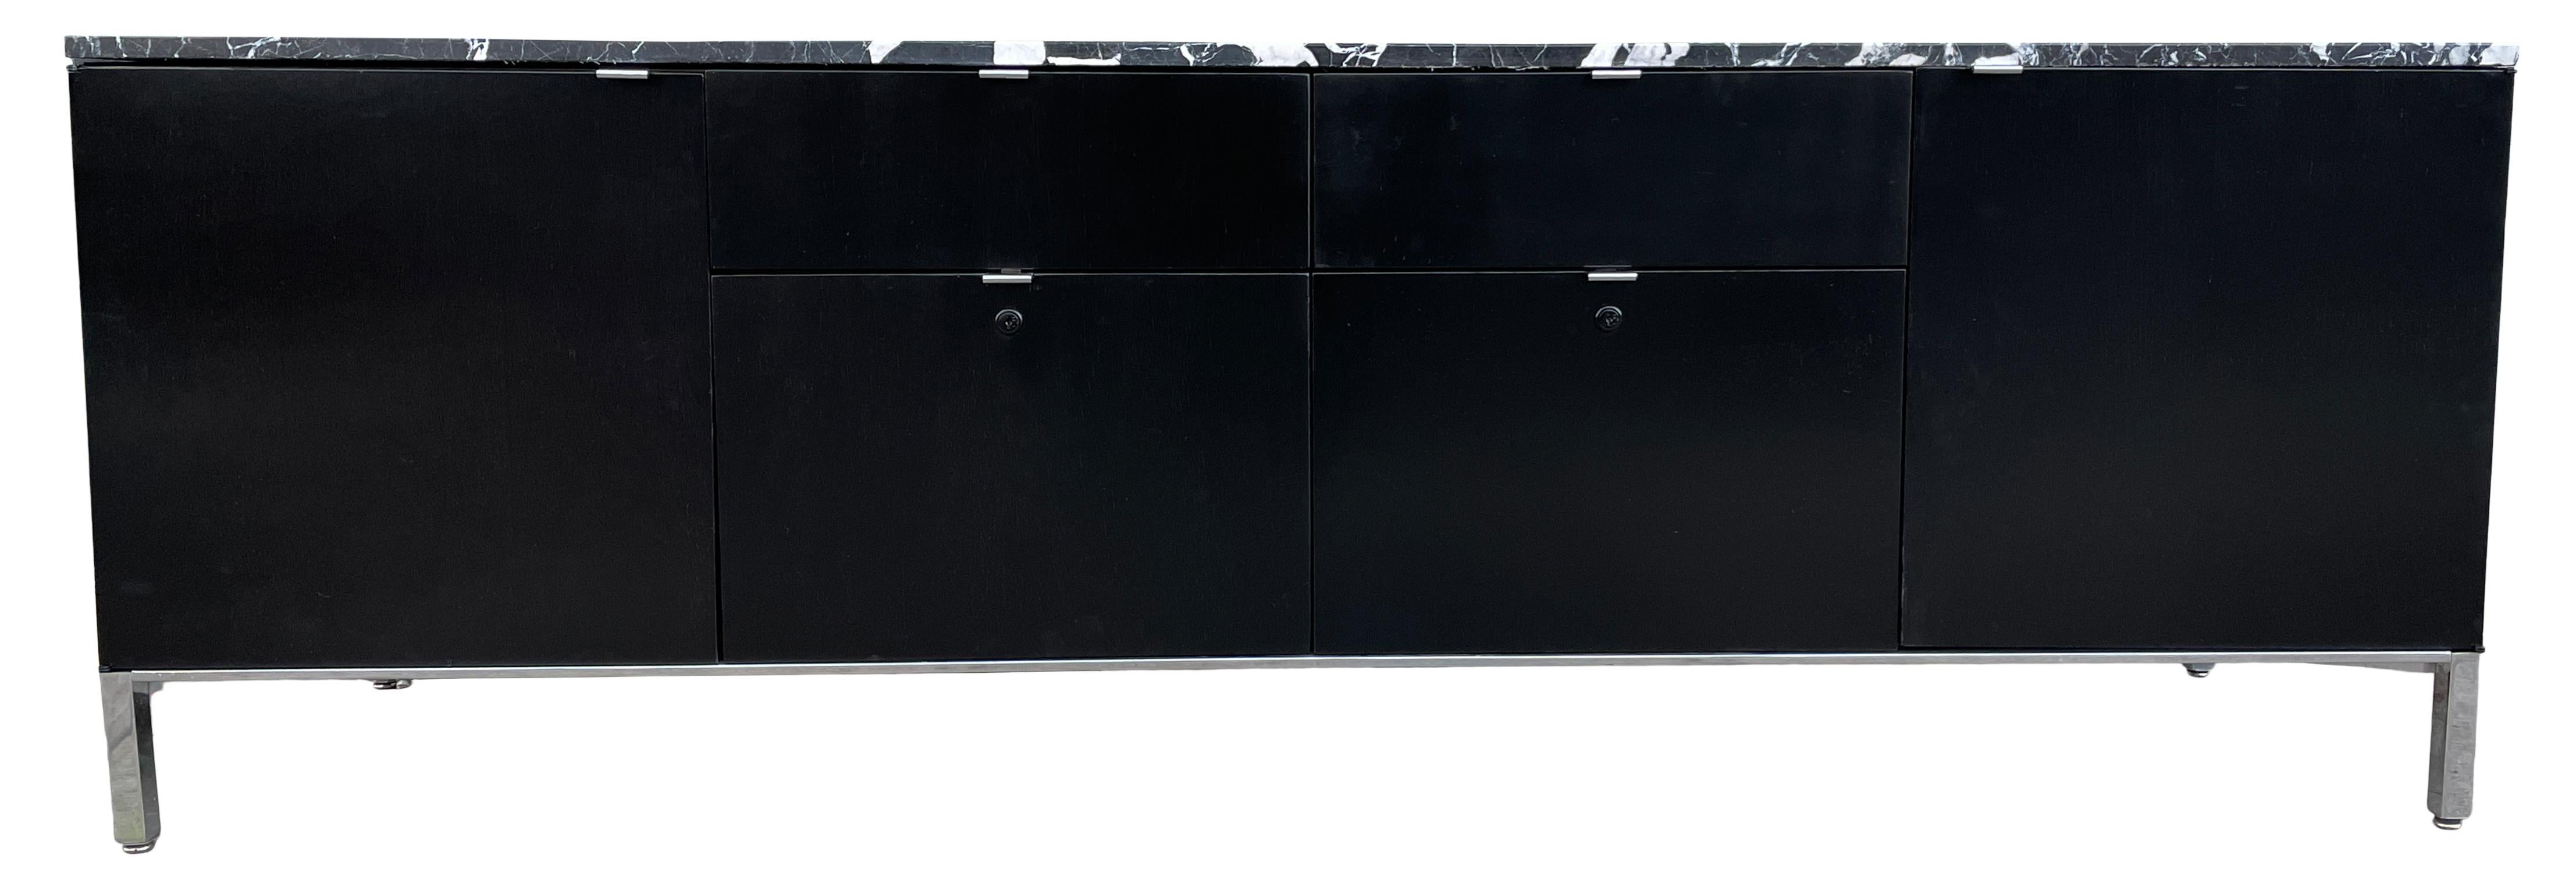 Beautiful and sophisticated Stow Davis low credenza in black lacquer. Featuring two deep lower file cabinet drawers, two top shallow drawers and two cabinet doors with adjustable shelves on a chrome base with chrome pulls. Sleek and ready for use